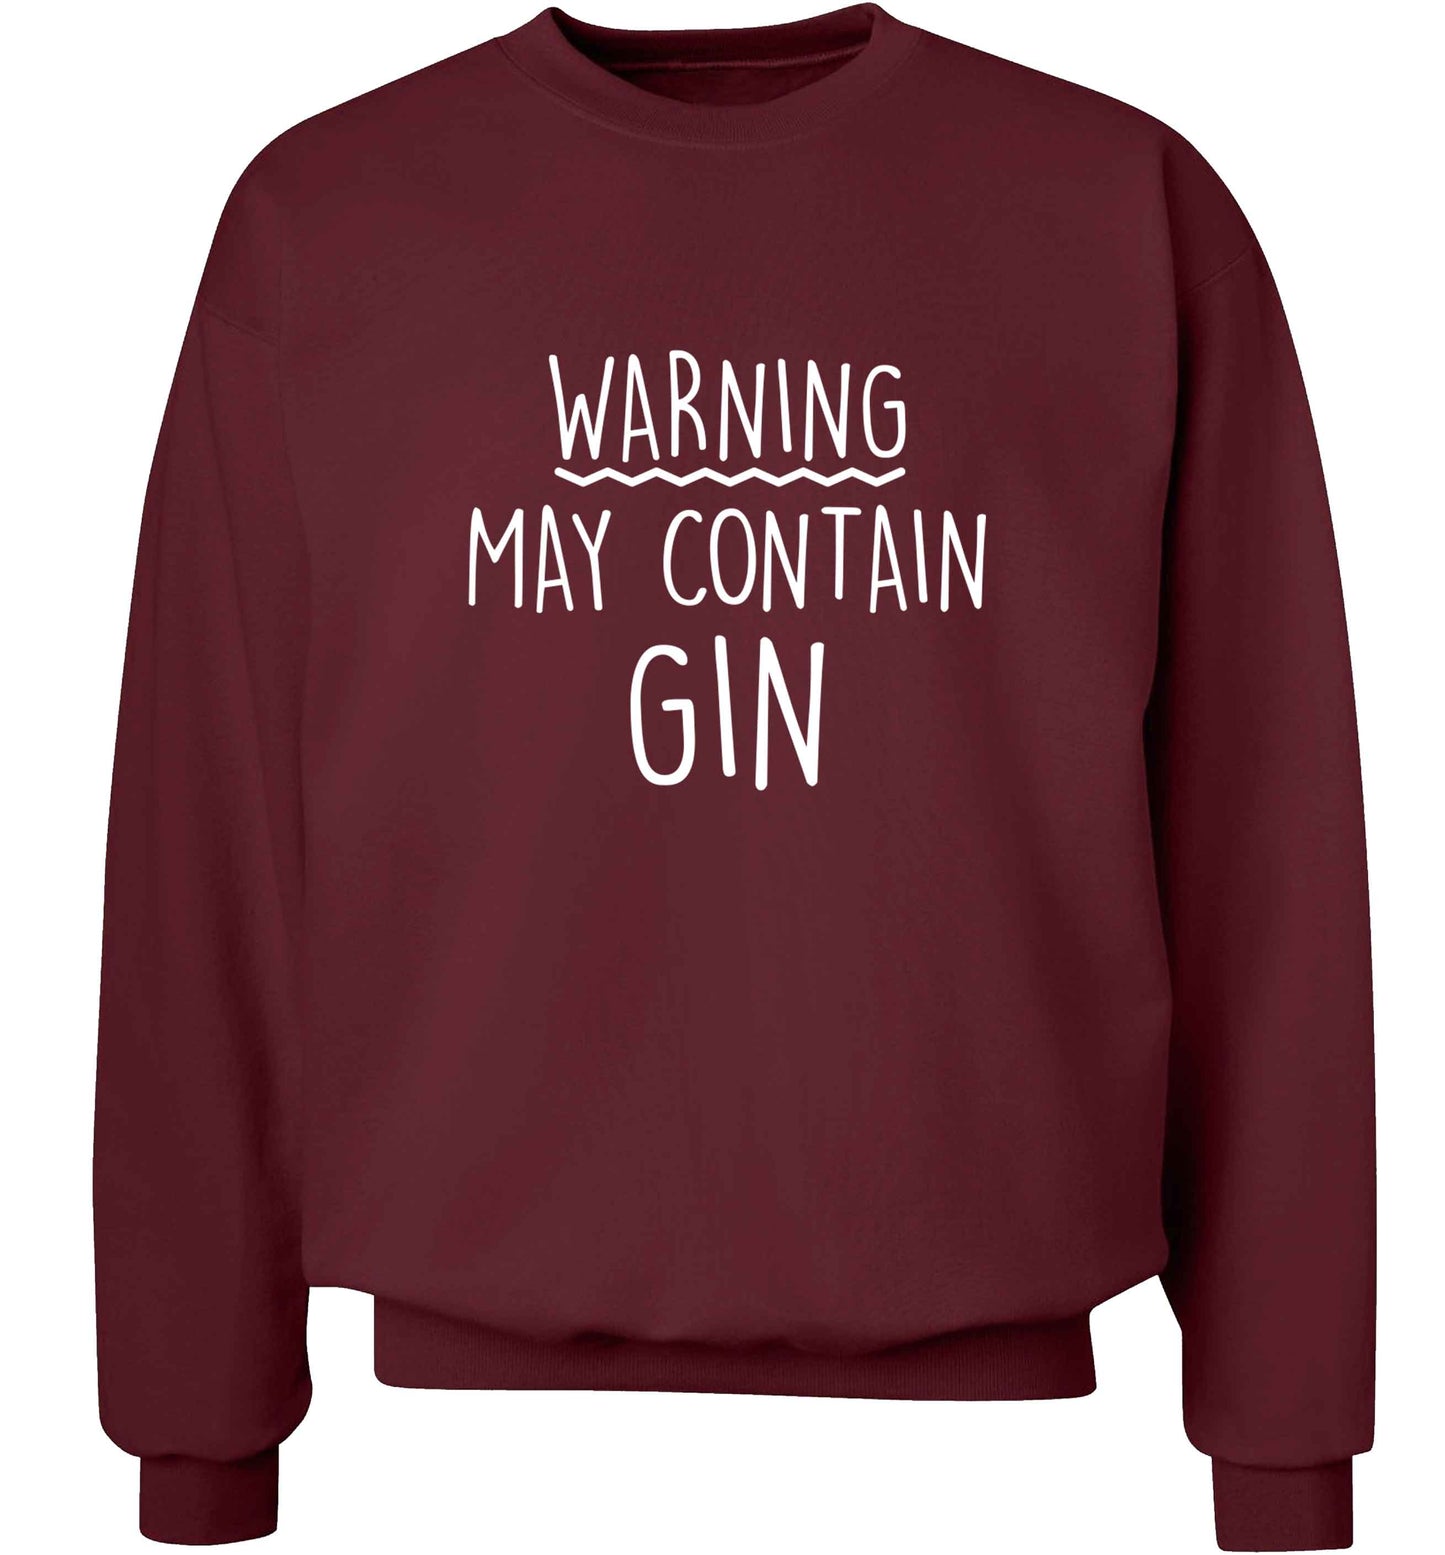 Warning may contain gin adult's unisex maroon sweater 2XL